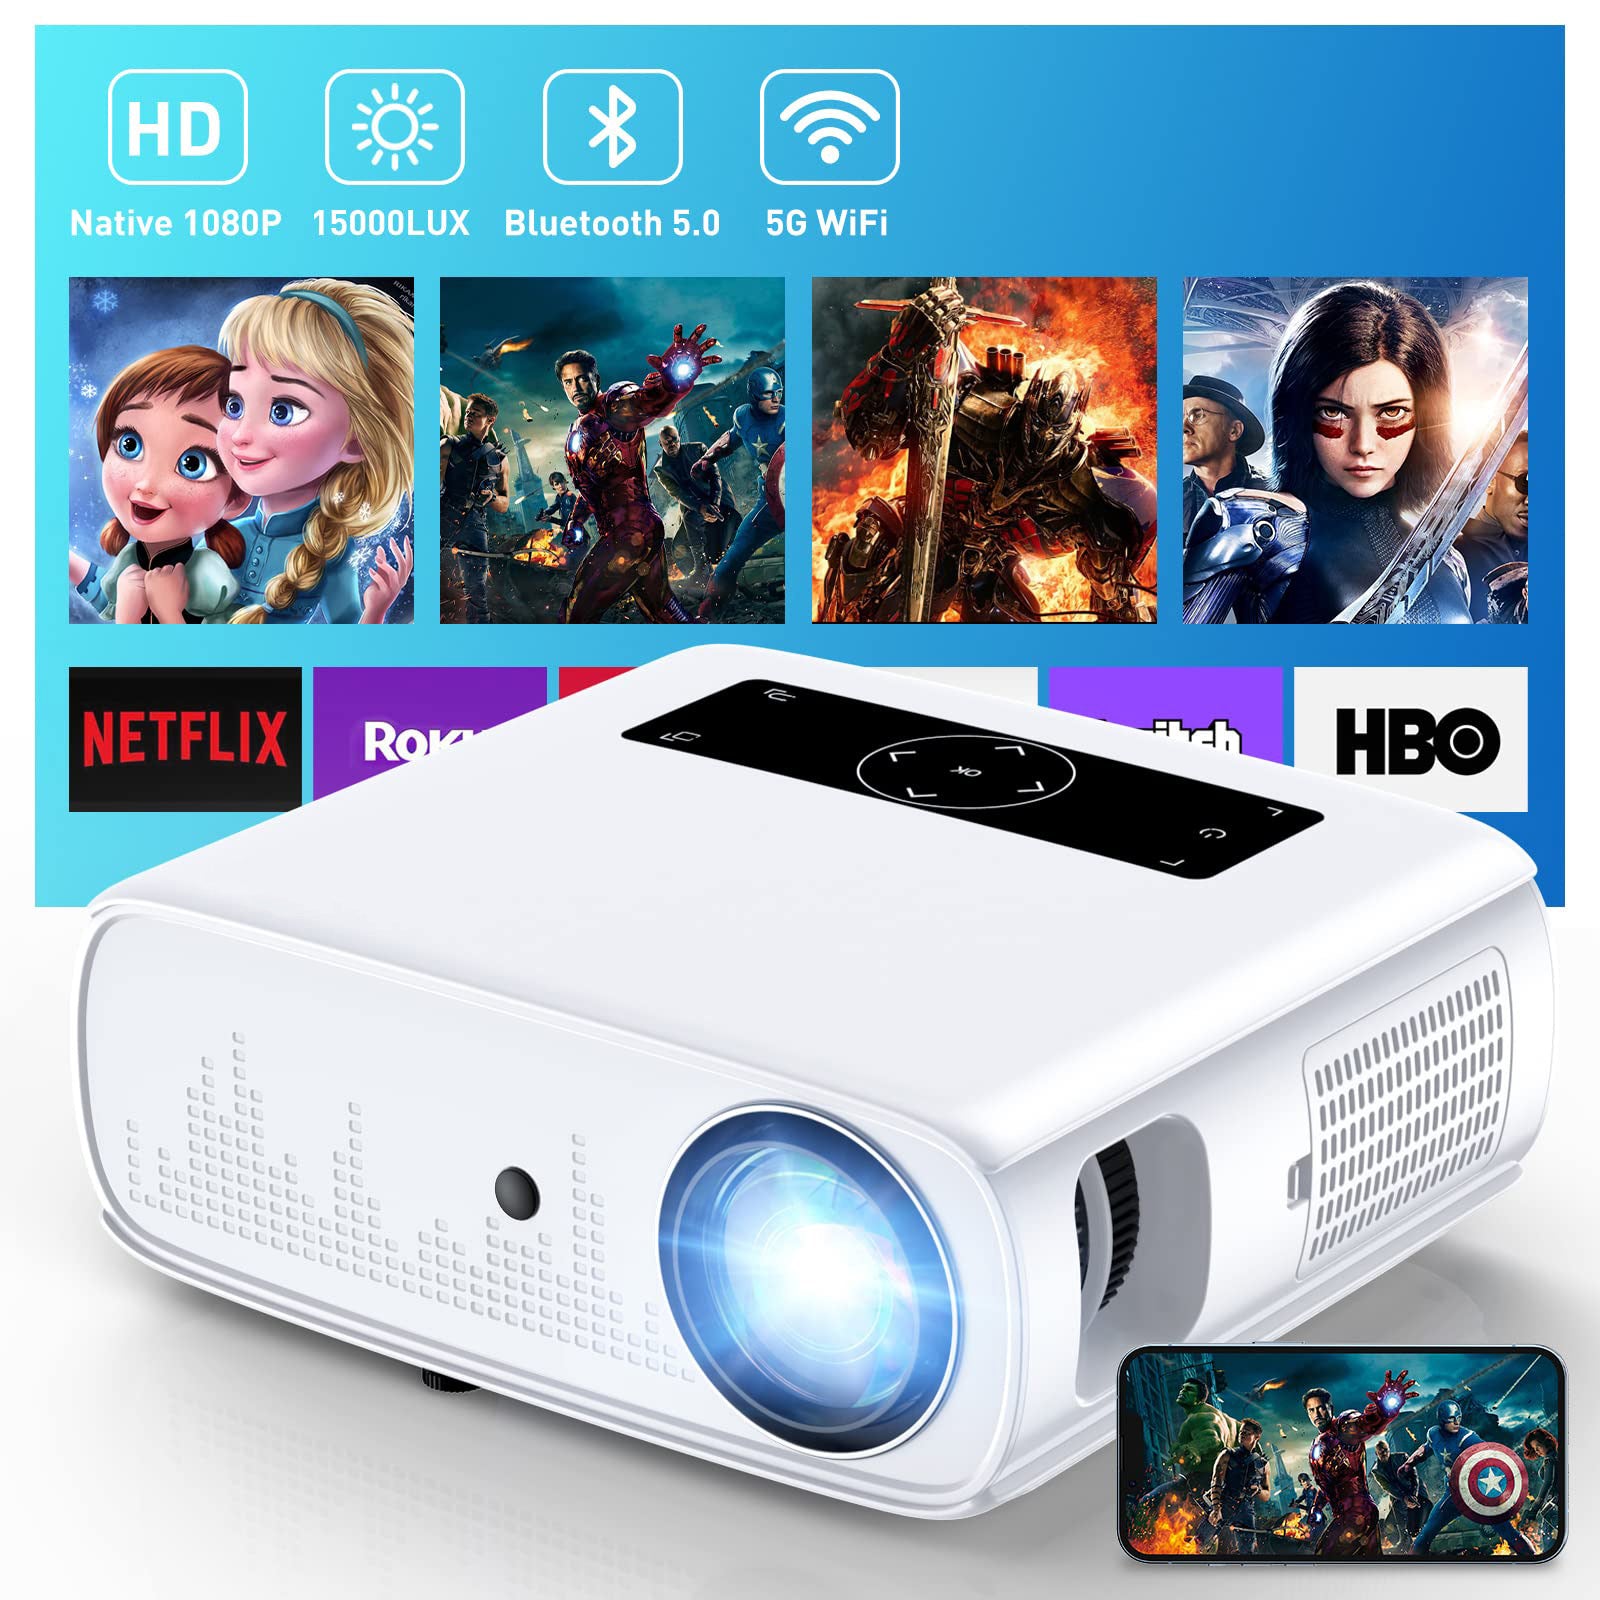 15000lux 490ANSI Native 1080P WiFi Bluetooth Projector